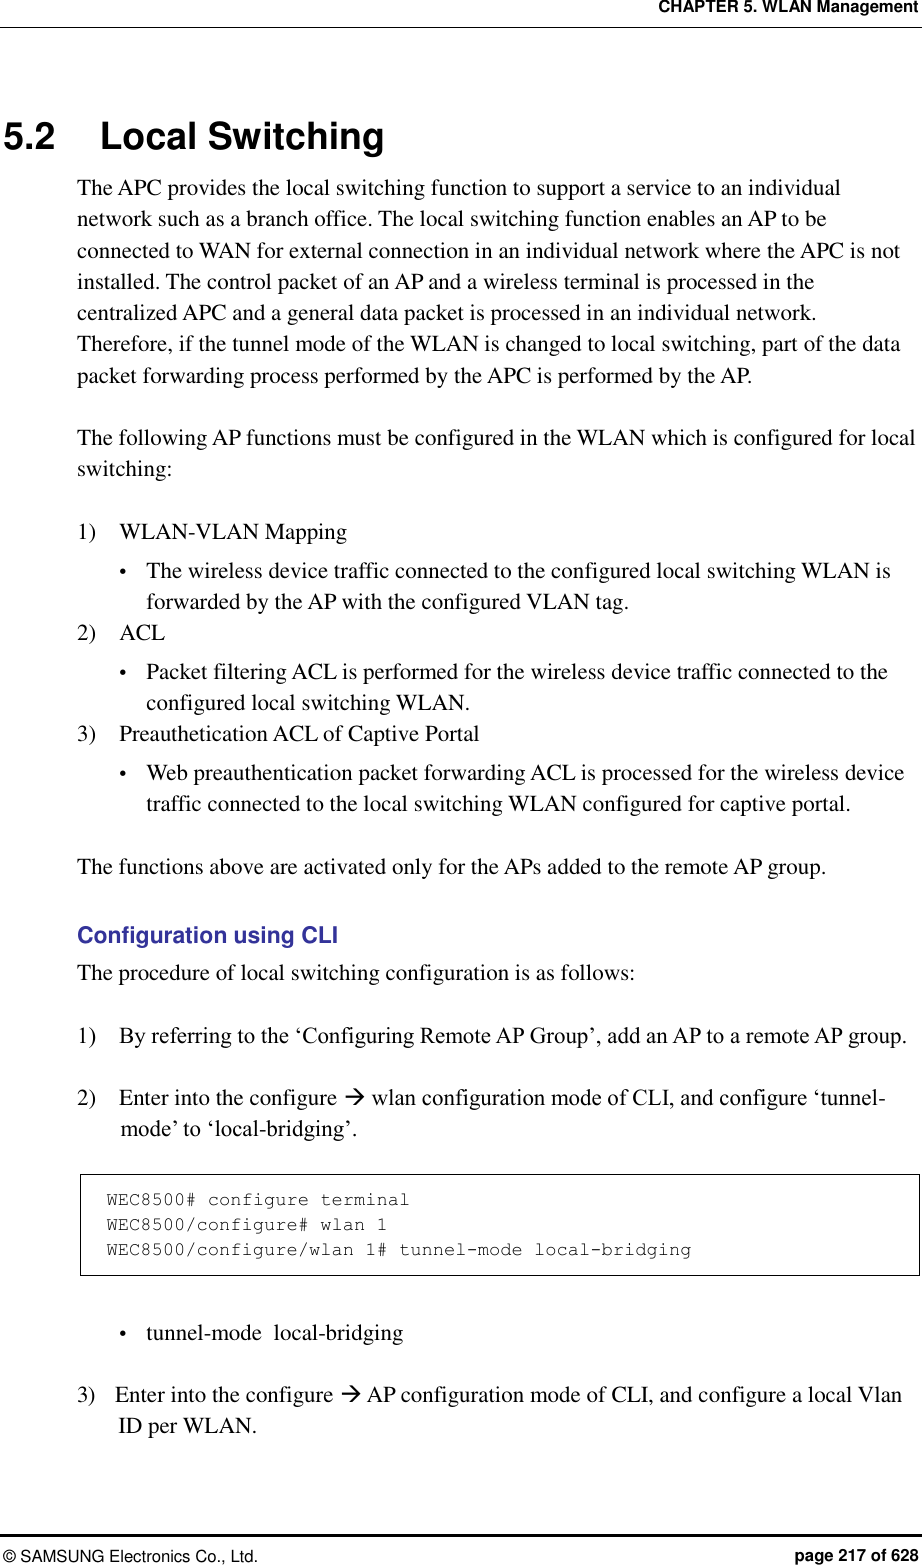 CHAPTER 5. WLAN Management ©  SAMSUNG Electronics Co., Ltd.  page 217 of 628 5.2  Local Switching The APC provides the local switching function to support a service to an individual network such as a branch office. The local switching function enables an AP to be connected to WAN for external connection in an individual network where the APC is not installed. The control packet of an AP and a wireless terminal is processed in the centralized APC and a general data packet is processed in an individual network. Therefore, if the tunnel mode of the WLAN is changed to local switching, part of the data packet forwarding process performed by the APC is performed by the AP.    The following AP functions must be configured in the WLAN which is configured for local switching:  1)    WLAN-VLAN Mapping  The wireless device traffic connected to the configured local switching WLAN is forwarded by the AP with the configured VLAN tag. 2)    ACL  Packet filtering ACL is performed for the wireless device traffic connected to the configured local switching WLAN.   3)    Preauthetication ACL of Captive Portal    Web preauthentication packet forwarding ACL is processed for the wireless device traffic connected to the local switching WLAN configured for captive portal.  The functions above are activated only for the APs added to the remote AP group.  Configuration using CLI The procedure of local switching configuration is as follows:  1)    By referring to the ‘Configuring Remote AP Group’, add an AP to a remote AP group.  2)    Enter into the configure  wlan configuration mode of CLI, and configure ‘tunnel-mode’ to ‘local-bridging’.  WEC8500# configure terminal WEC8500/configure# wlan 1  WEC8500/configure/wlan 1# tunnel-mode local-bridging   tunnel-mode  local-bridging  3)    Enter into the configure  AP configuration mode of CLI, and configure a local Vlan ID per WLAN. 